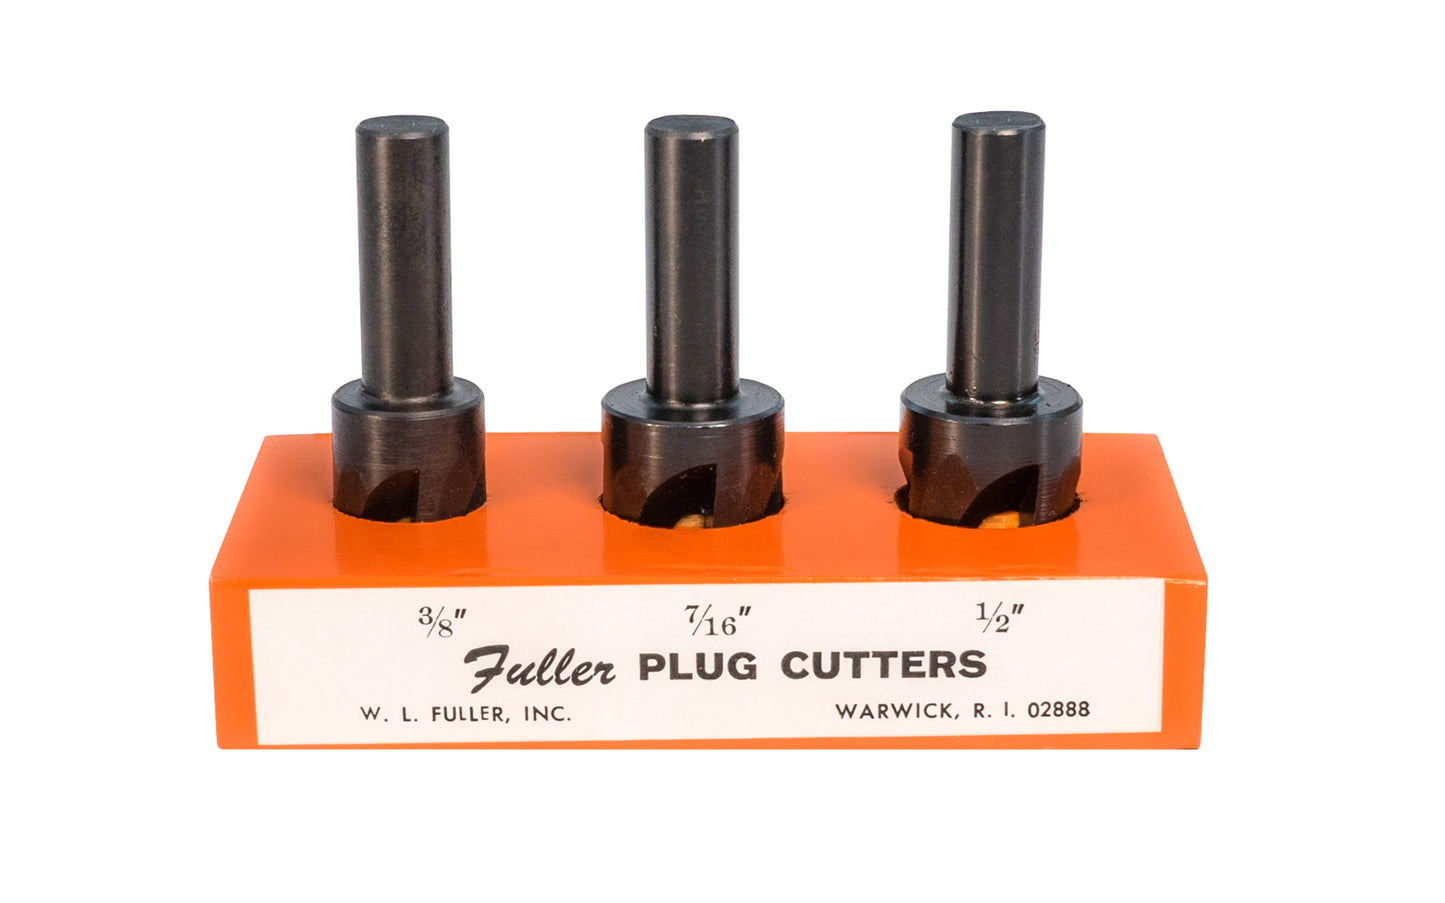 3-piece plug cutter set of sizes 3/8", 7/16", & 1/2" plug cutters - Model No. 11696003 - Made in USA · Set includes wood block holder - Made of carbon steel, heat treated, & hardened for long tool life ~ Four flutes for clean cutting & accurate boring ~ For use in soft woods & most hardwoods. 807200047756